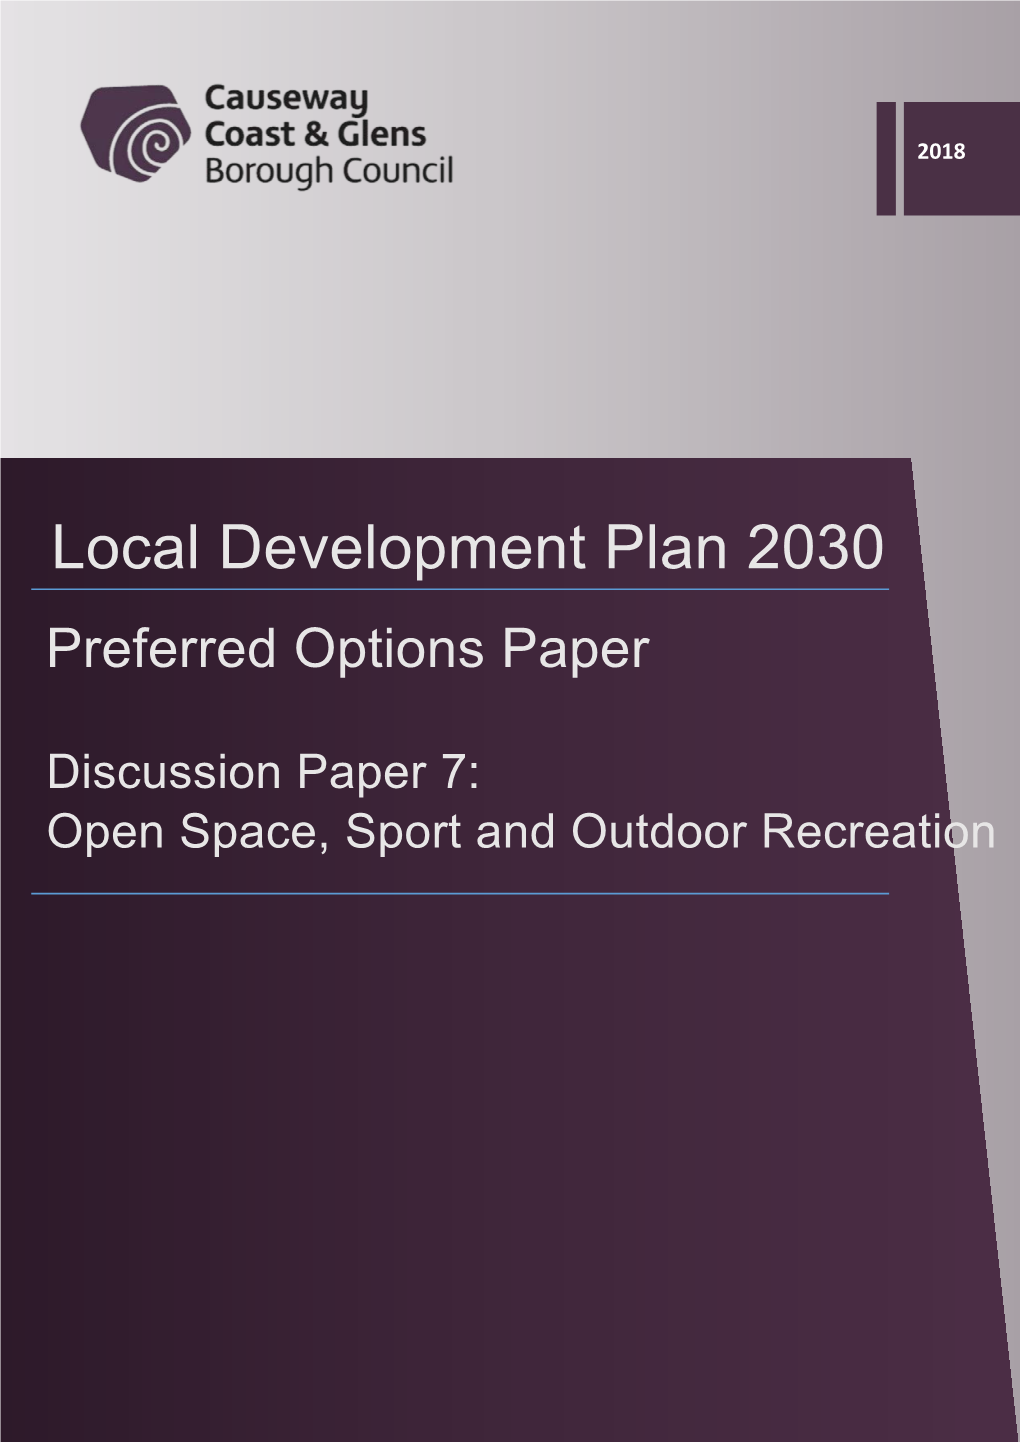 Open Space, Sport and Outdoor Recreation